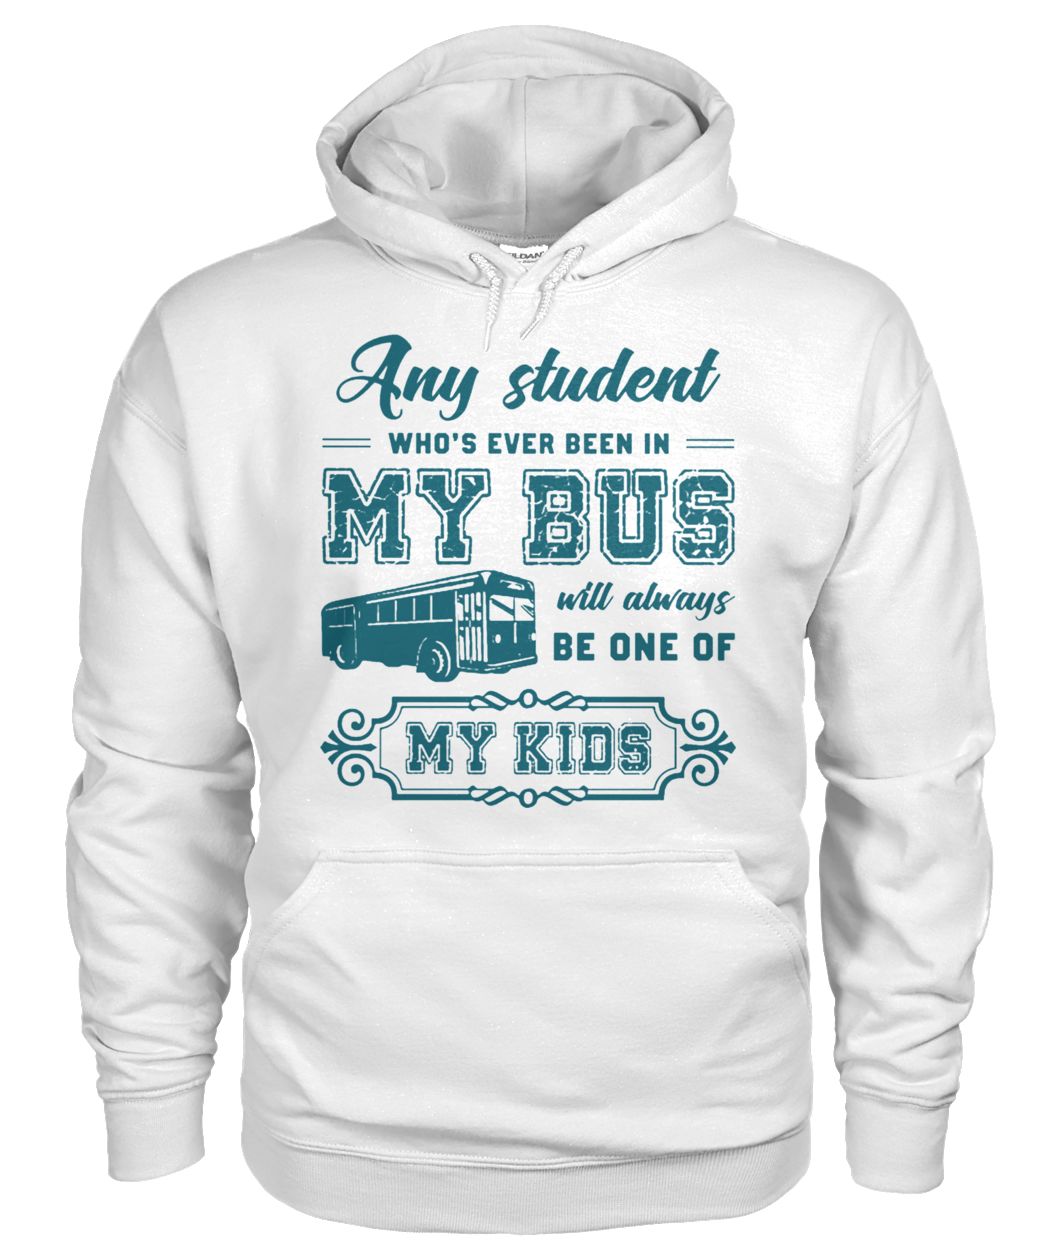 Any student who's ever been in my bus will always be one of my kids gildan hoodie